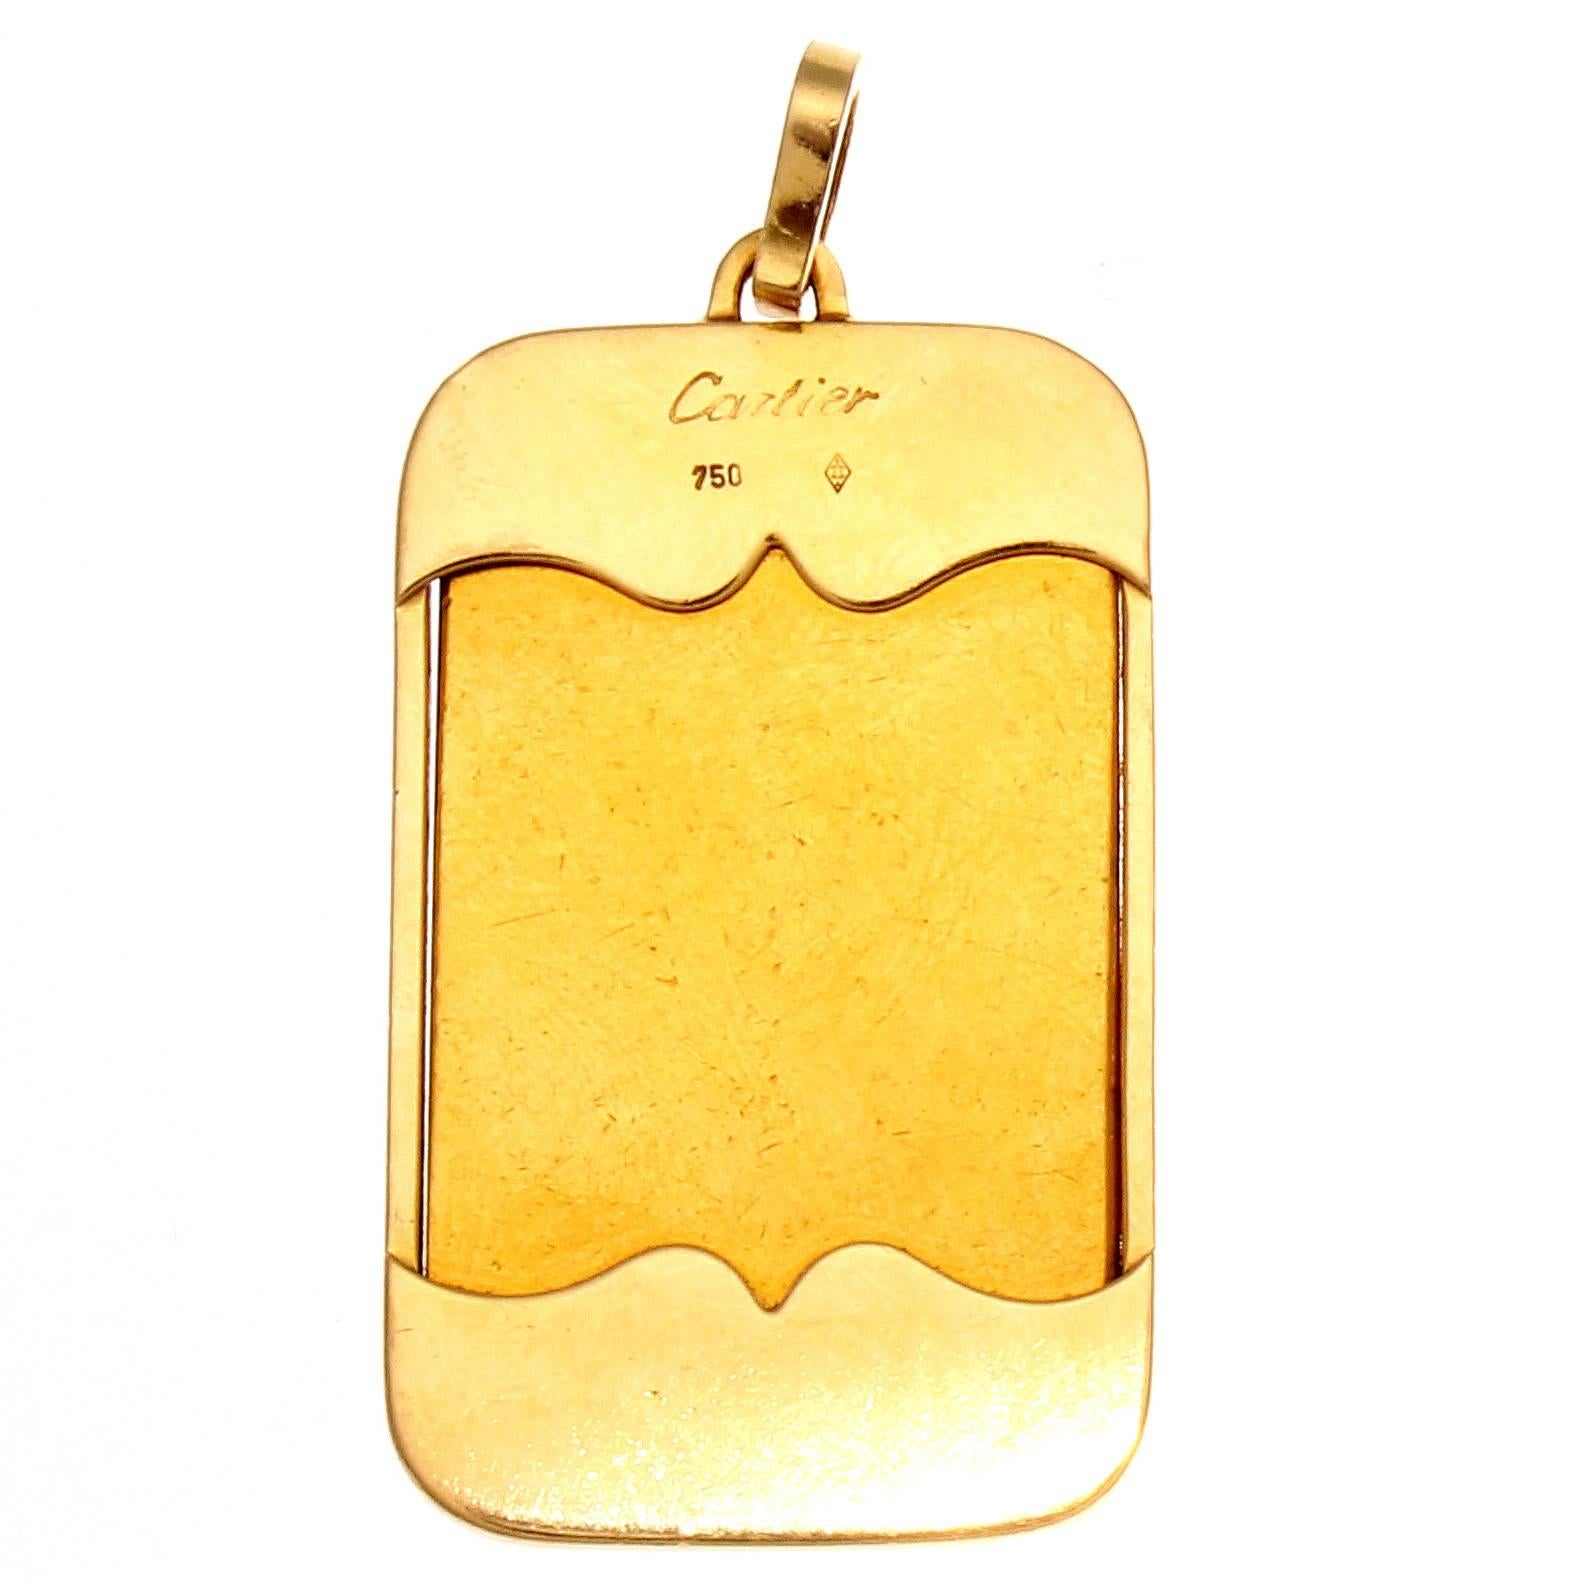 A unique replication of the gold bar featured as a pendant from Cartier. 

Signed Cartier.